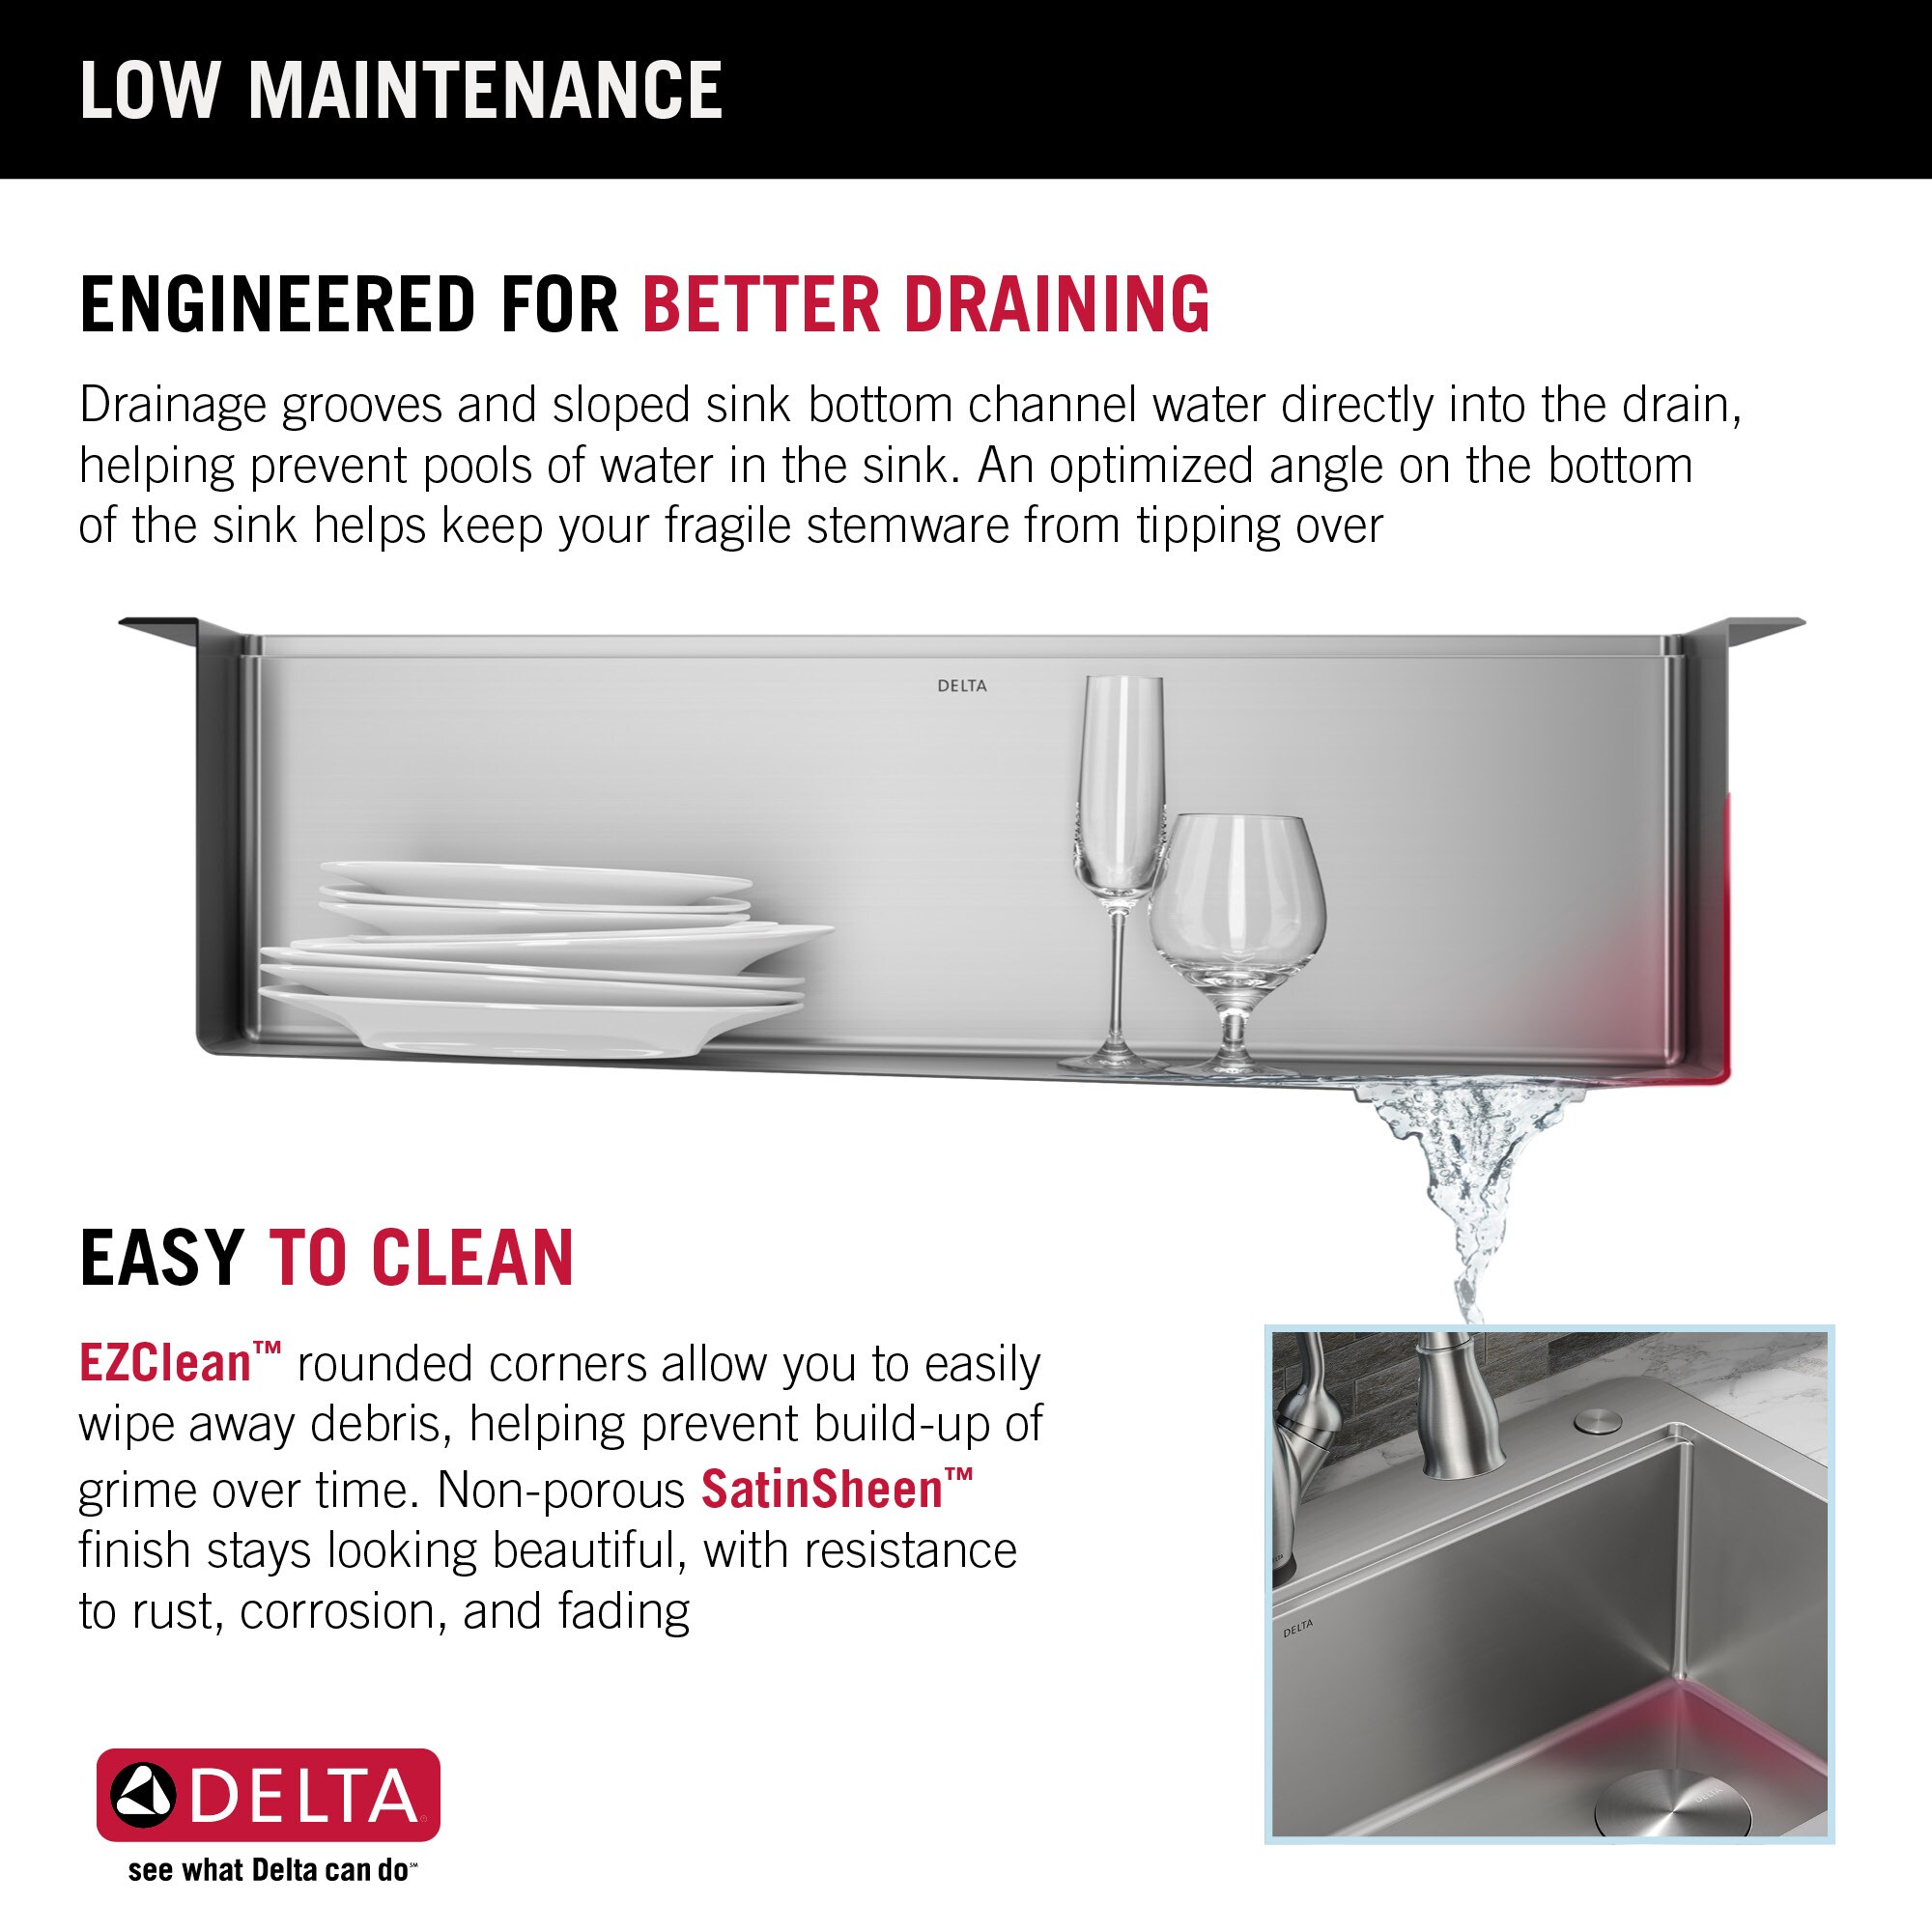 33” Workstation Kitchen Sink Drop-In Top Mount Stainless Steel Single Bowl  with WorkFlow™ Ledge and Accessories in Stainless Steel 95A932-33S-SS